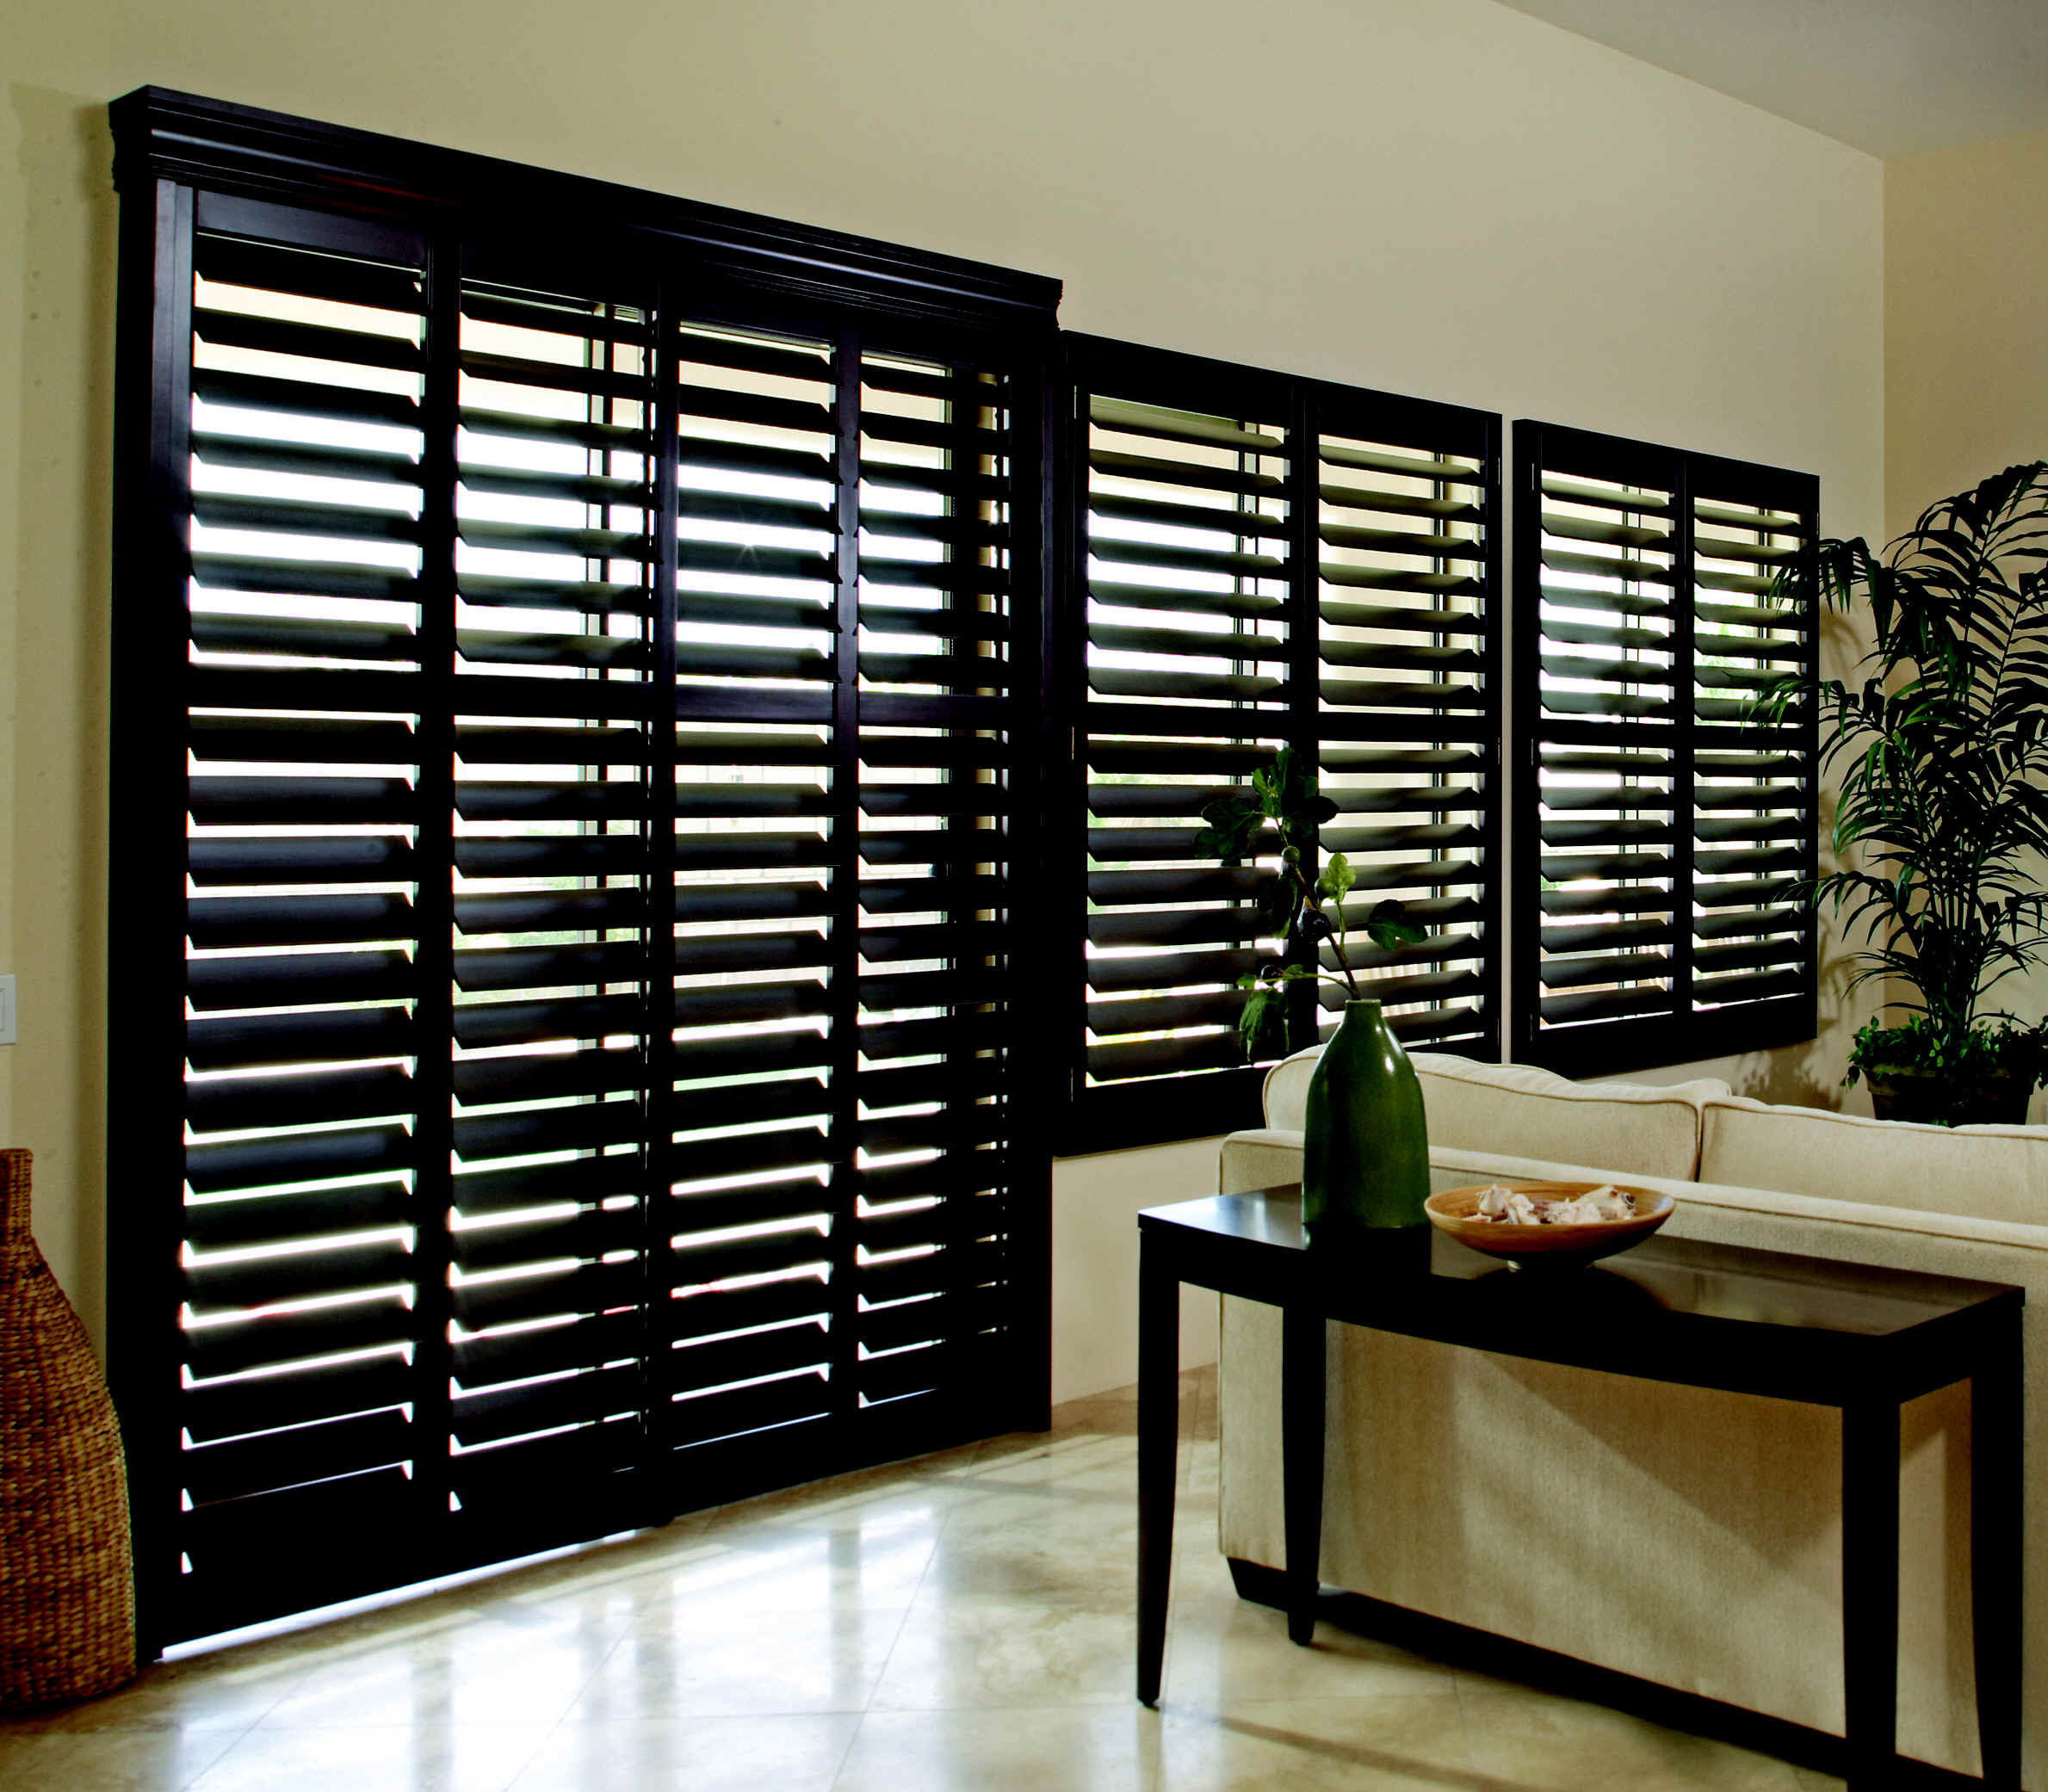 Clearview Shutters For Sale At Low Prices in Freeport